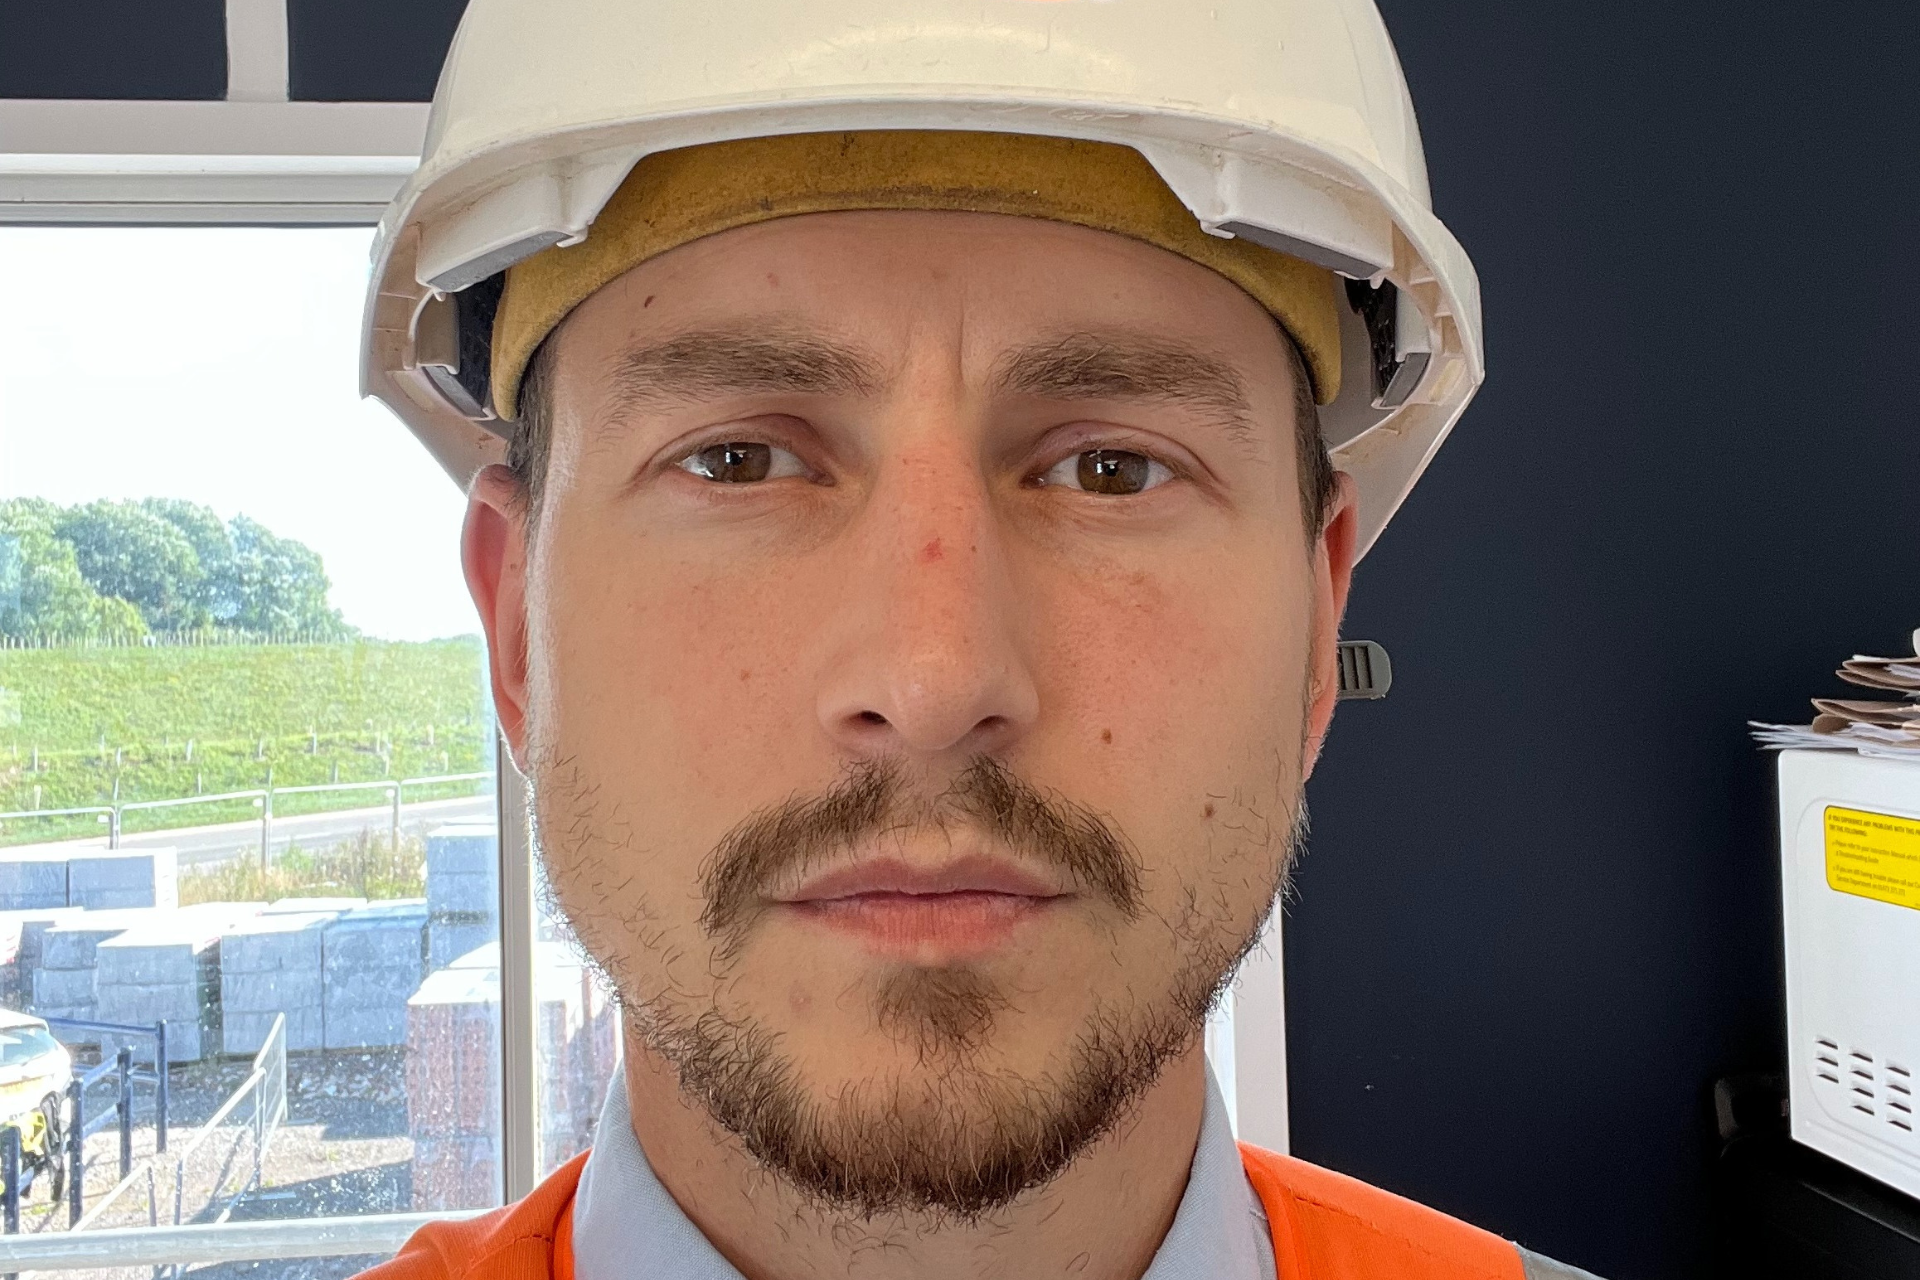 a man in a hard hat with a mustache looking at the camera